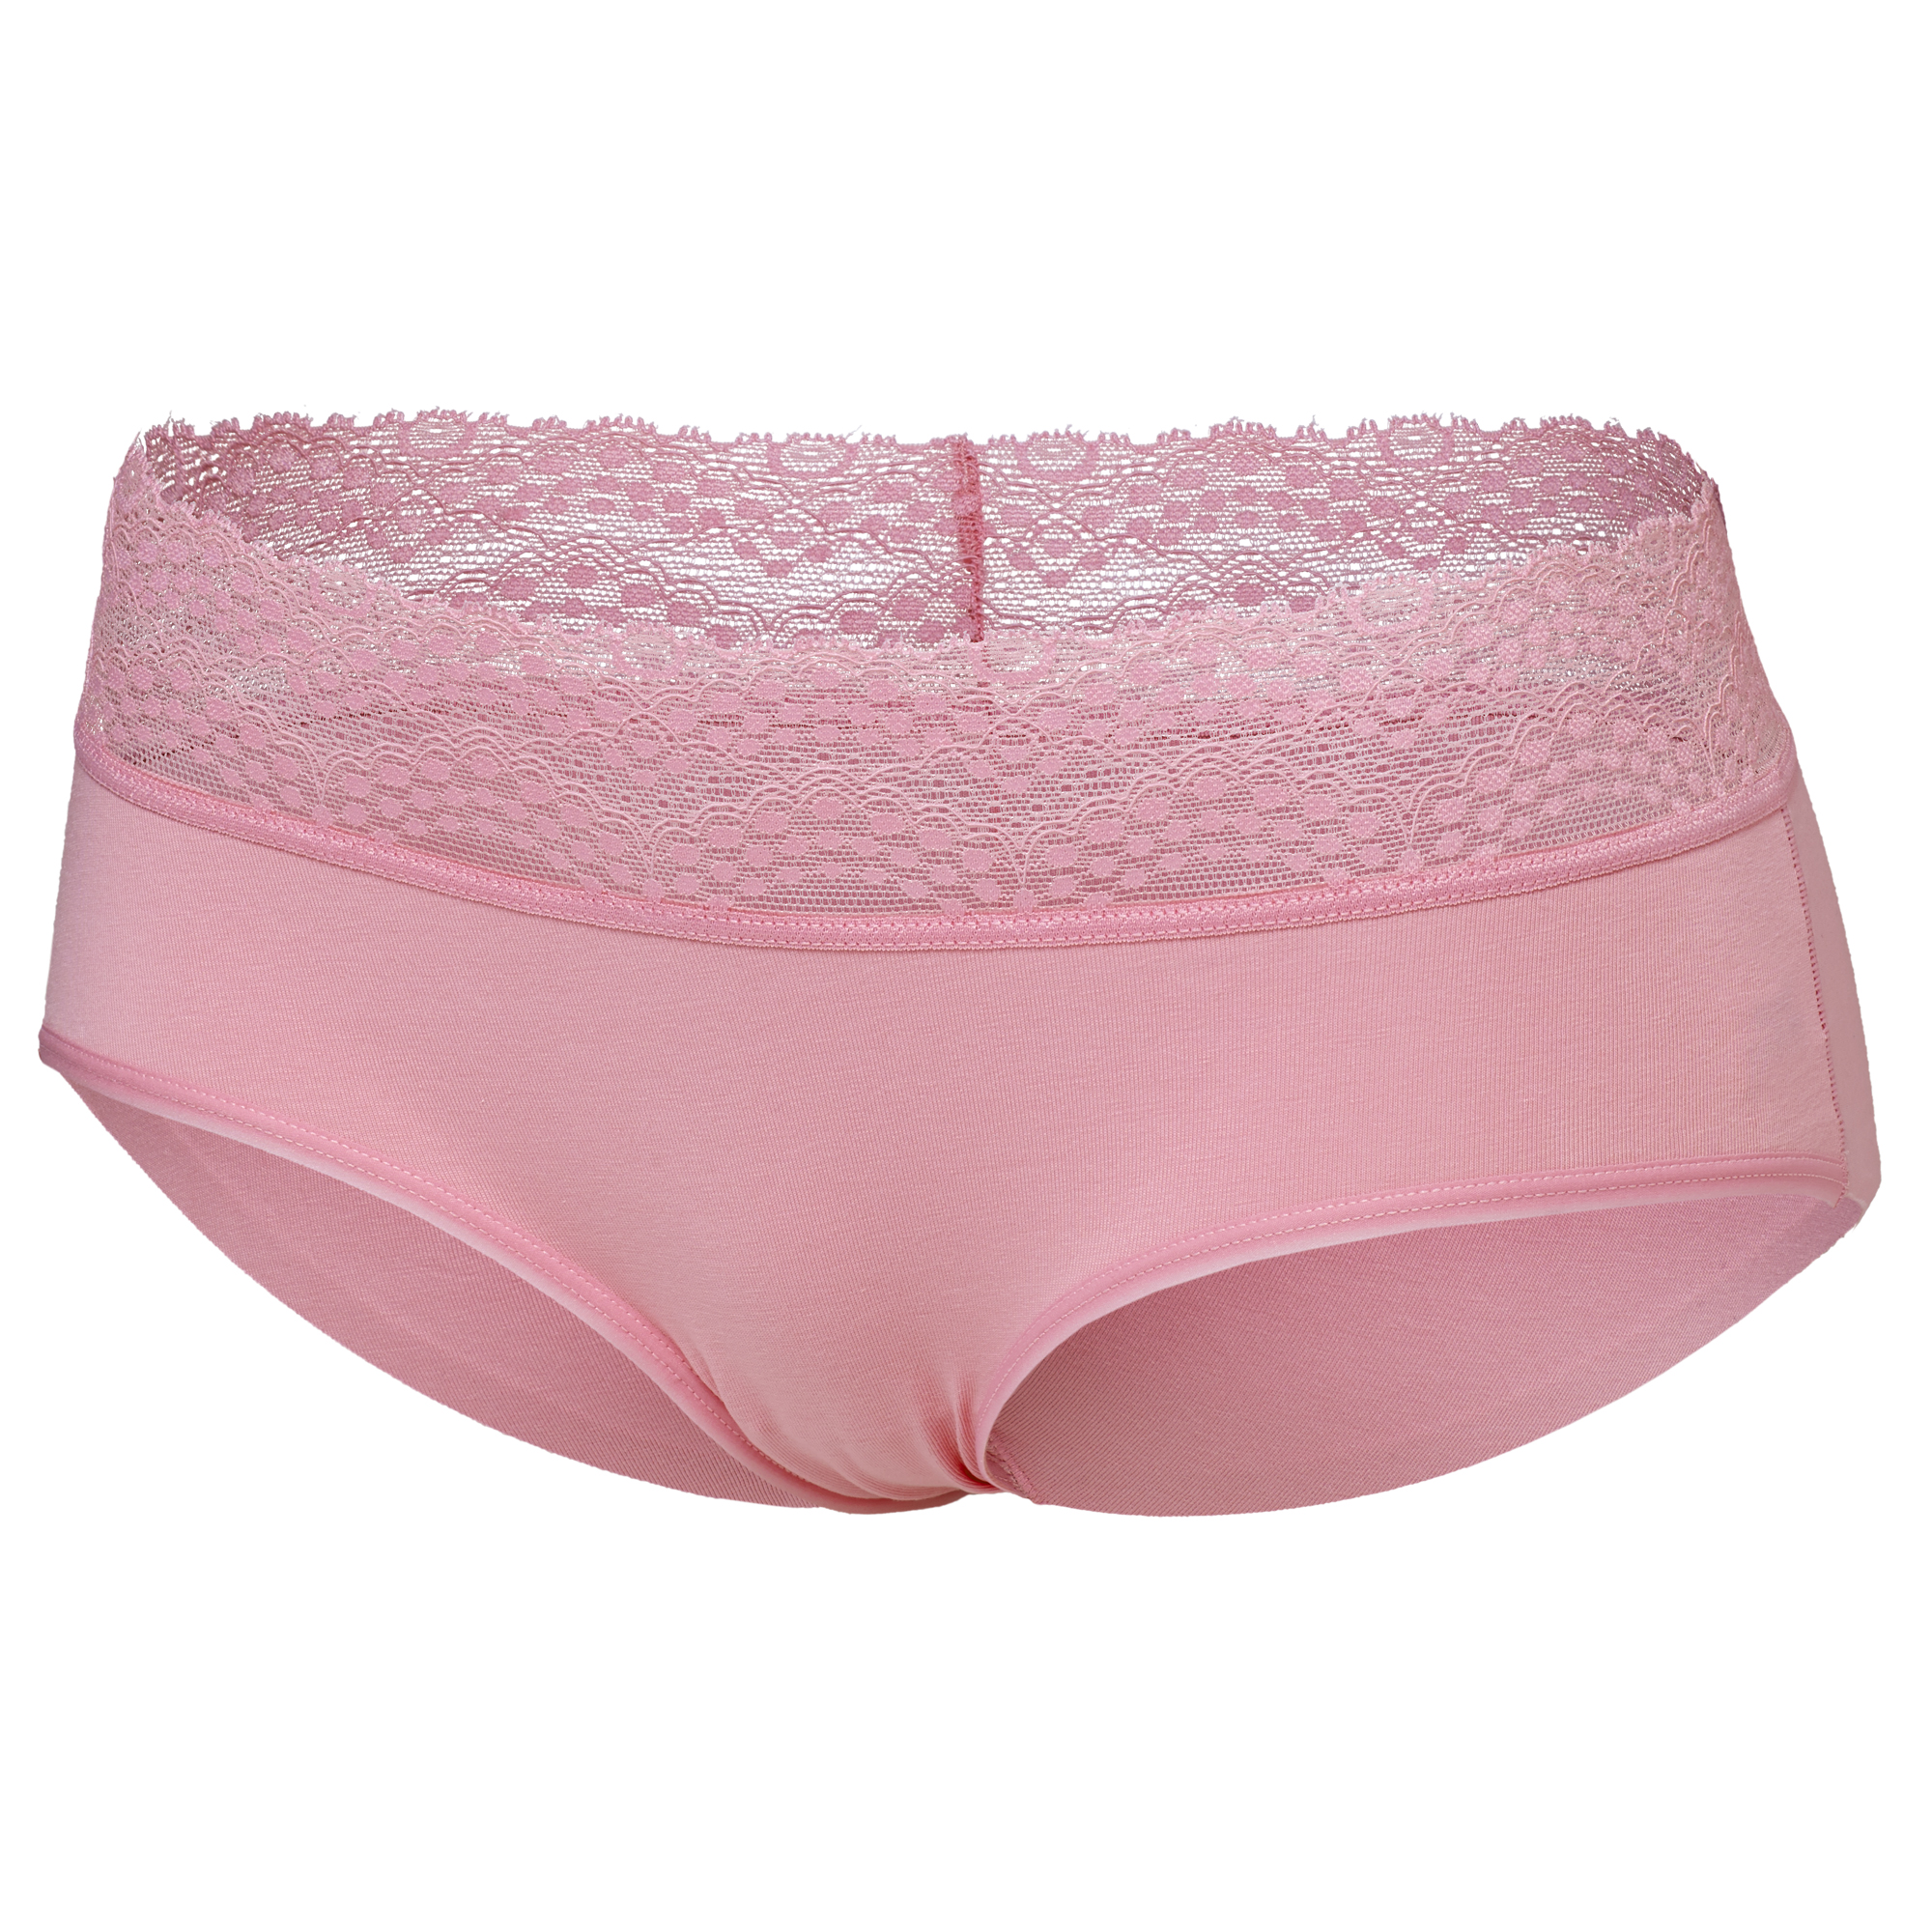 Truse invisible bomull med blonde rosa, baked pink (web), hi-res